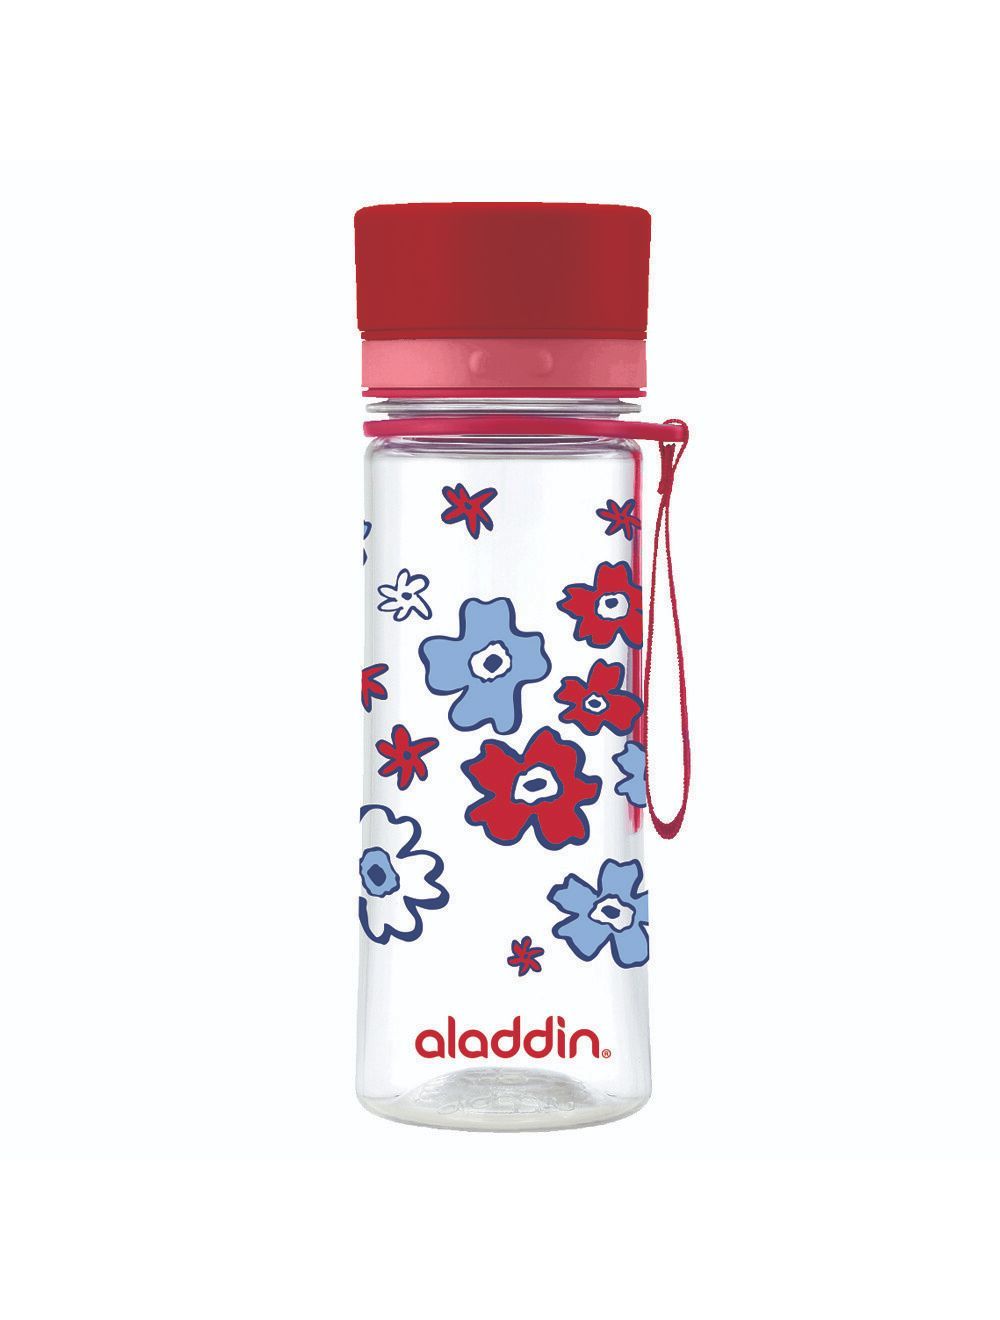 Aladdin Aveo Water Bottle 0.35L Red (Graphics)-10-01101-086